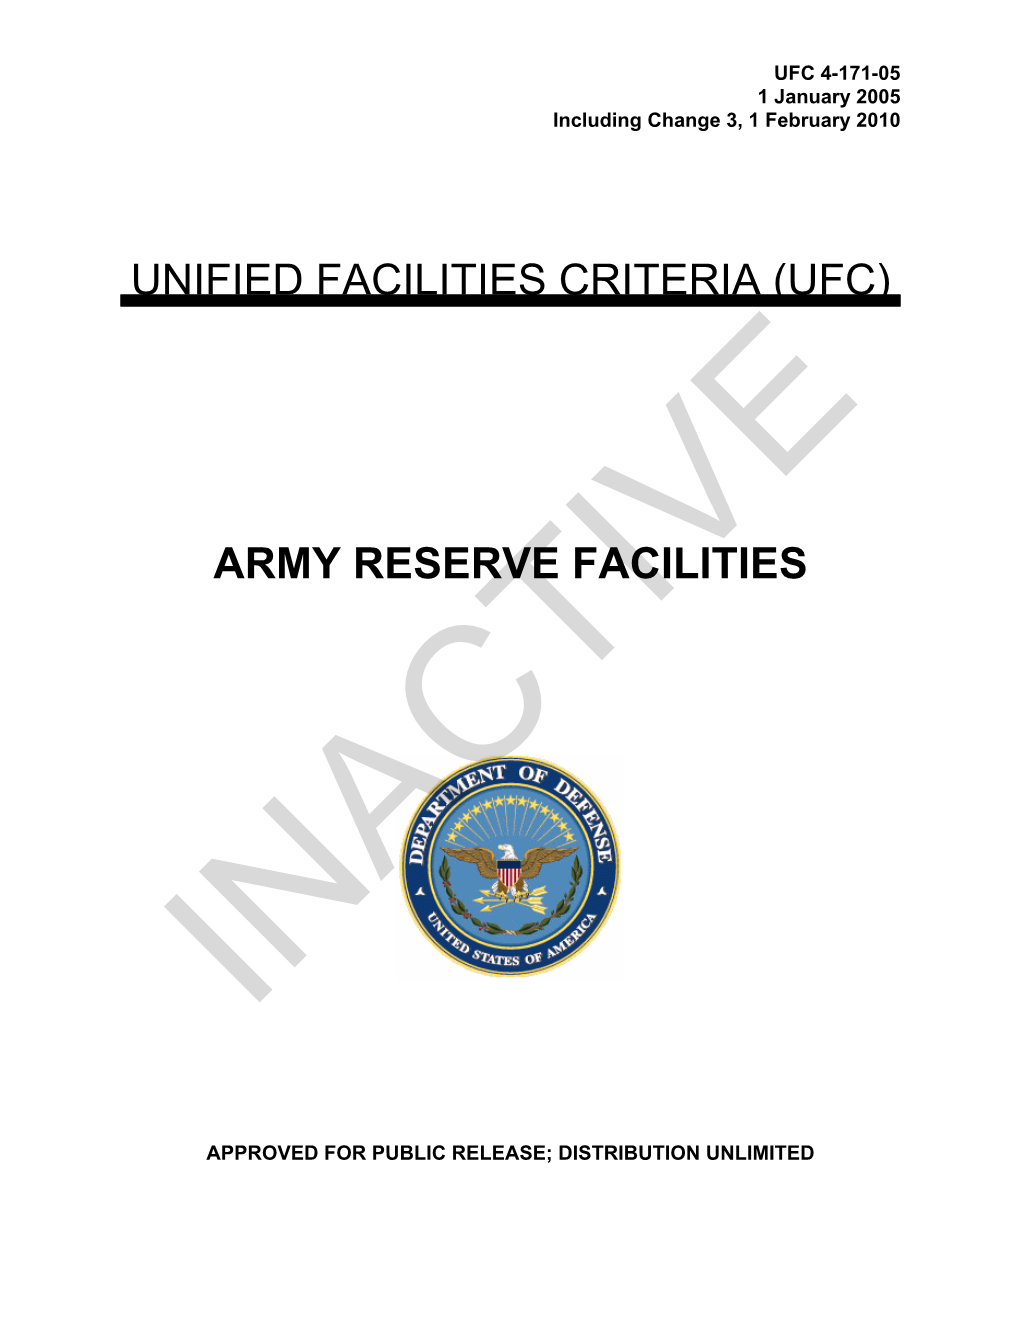 UFC 4-171-05 Army Reserve Facilities, with Change 3